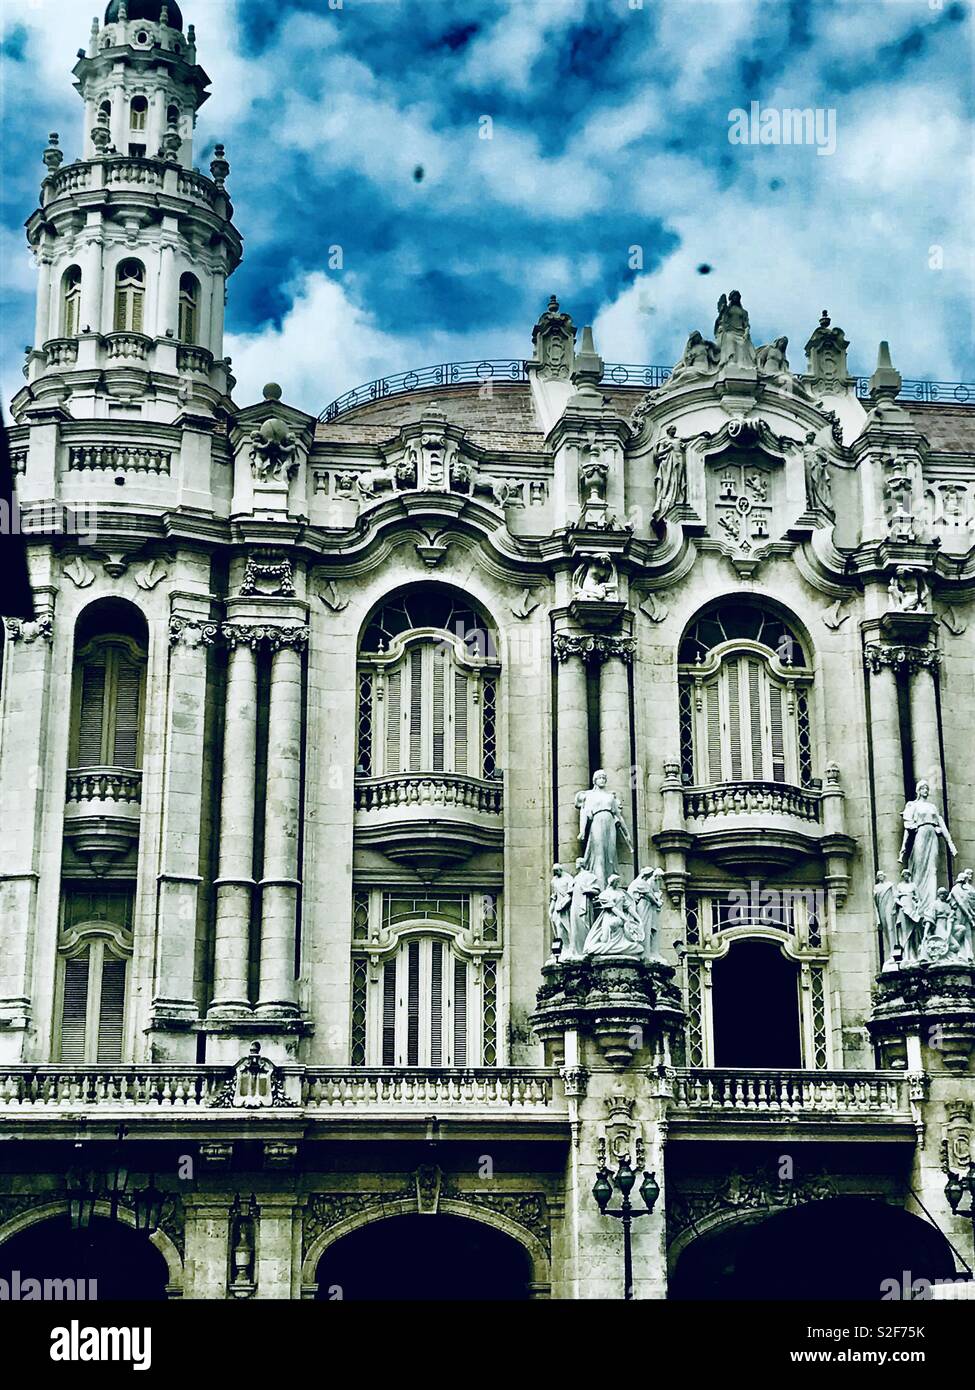 Gran Teatro de La Habana, one of the largest Opera Houses in the world. Designed by Belgian architect, Paul Belau, the theater faces Parque Central and is host to Cuba’s national ballet and opera. Stock Photo